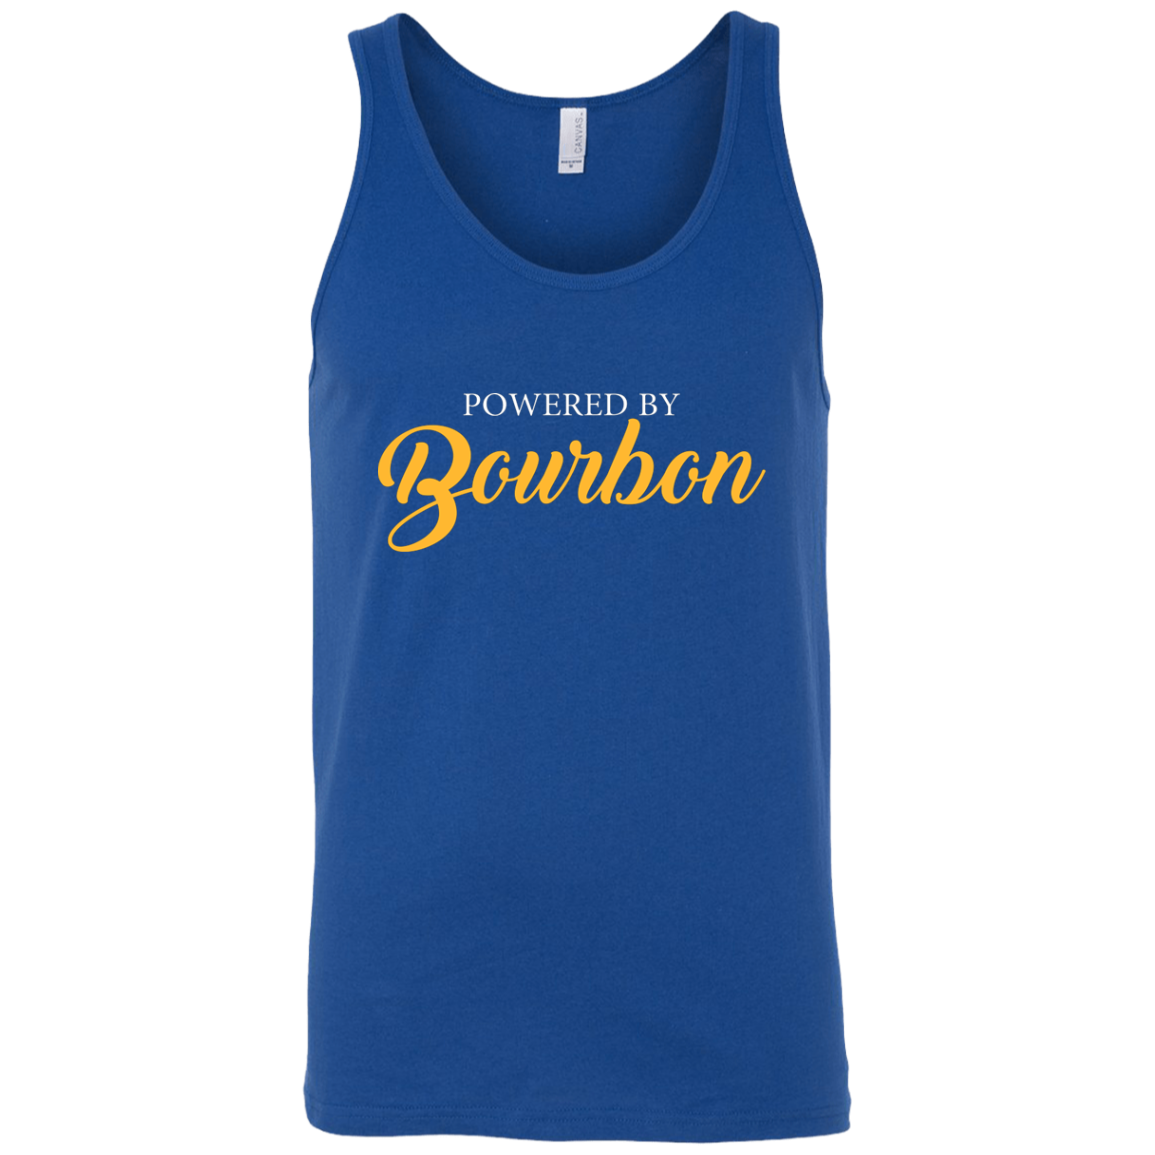 Powered By Bourbon Tank Top Apparel - The Beer Lodge